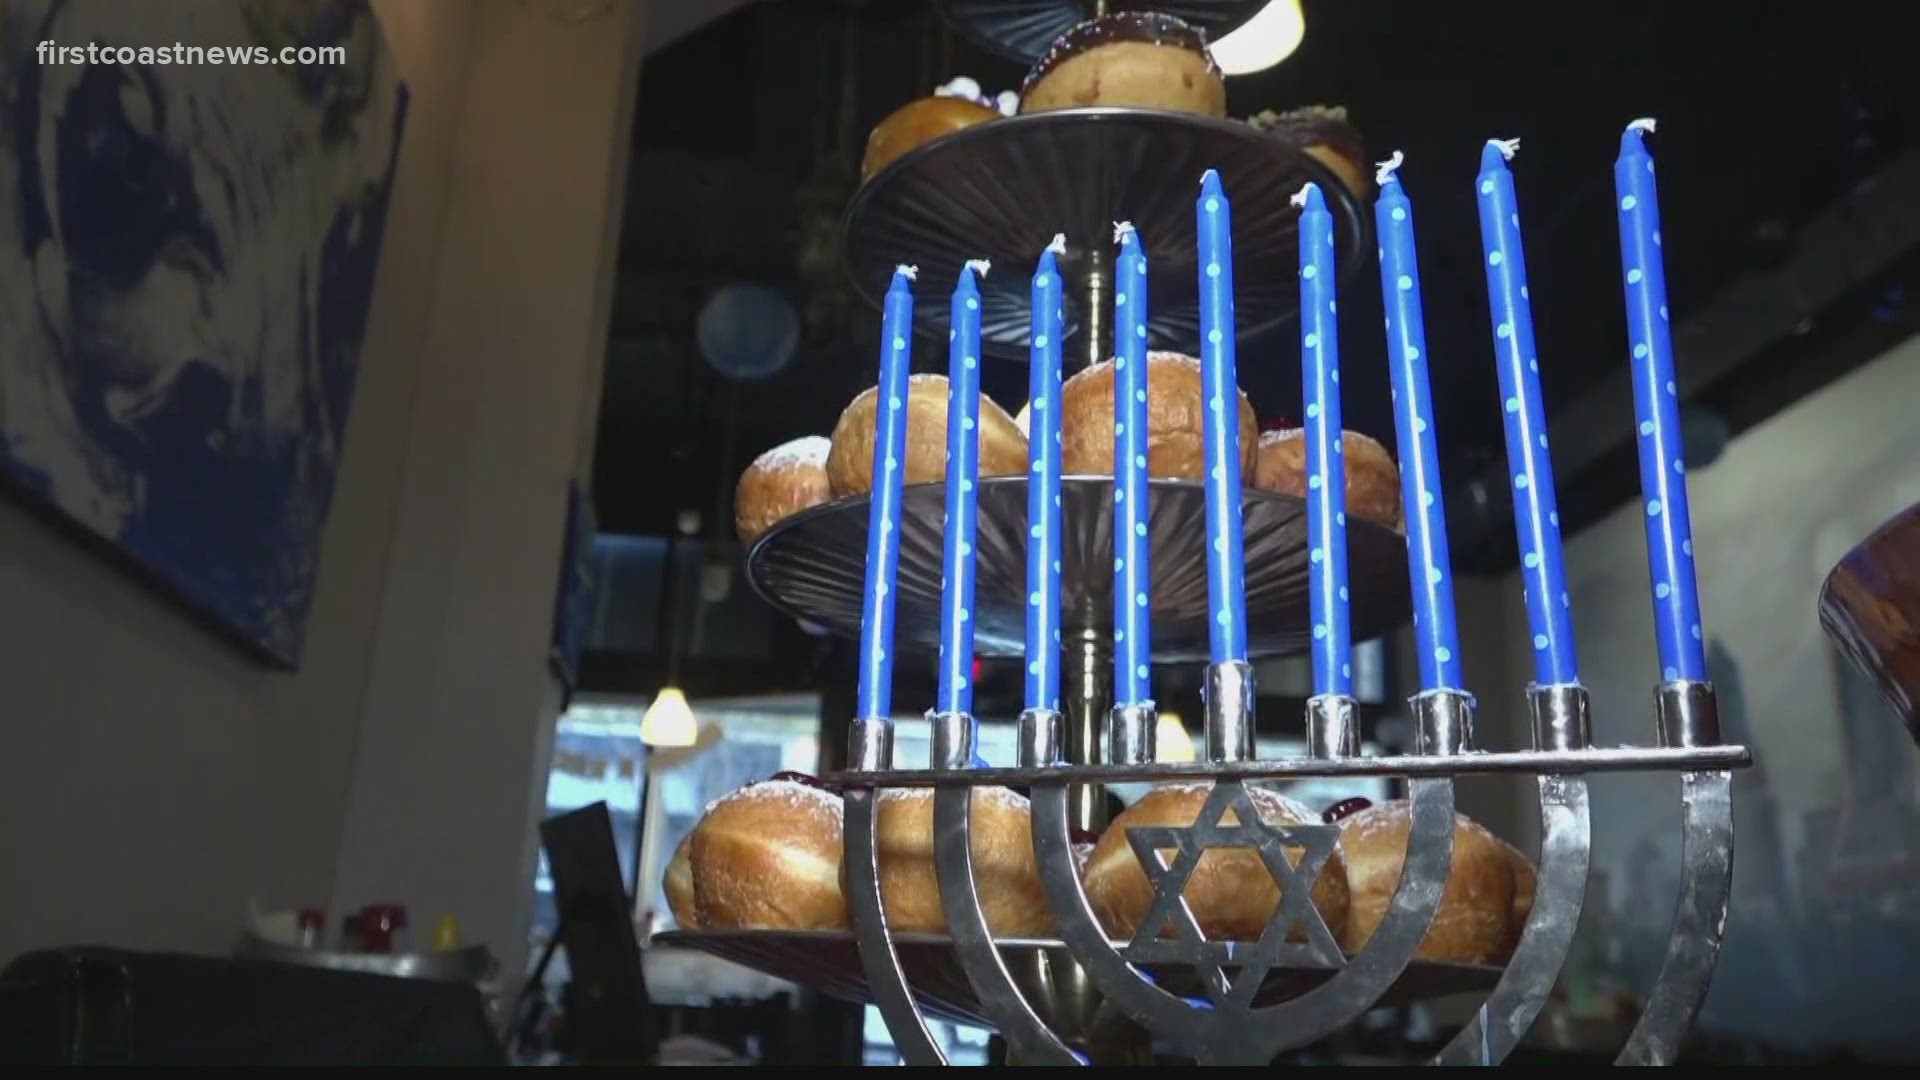 Gili's Kitchen is a Jewish deli, bakery, and restaurant in downtown Jacksonville serving traditional Israeli food and Hanukkah treats.